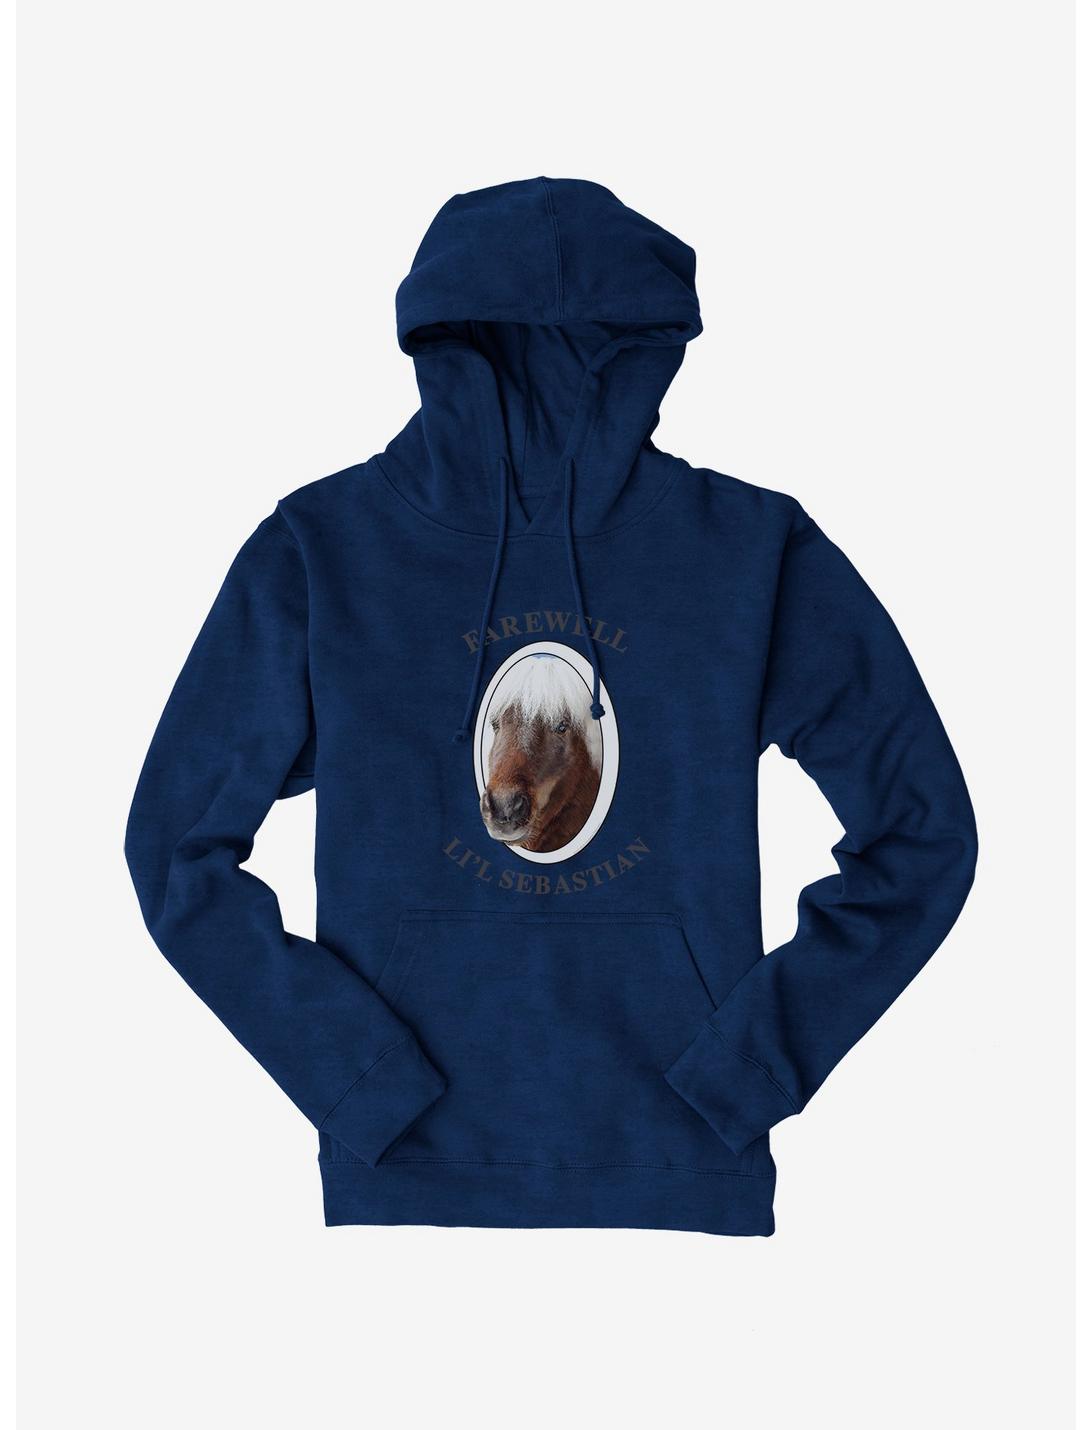 Parks And Recreation Farewell Sebastian Hoodie, NAVY, hi-res